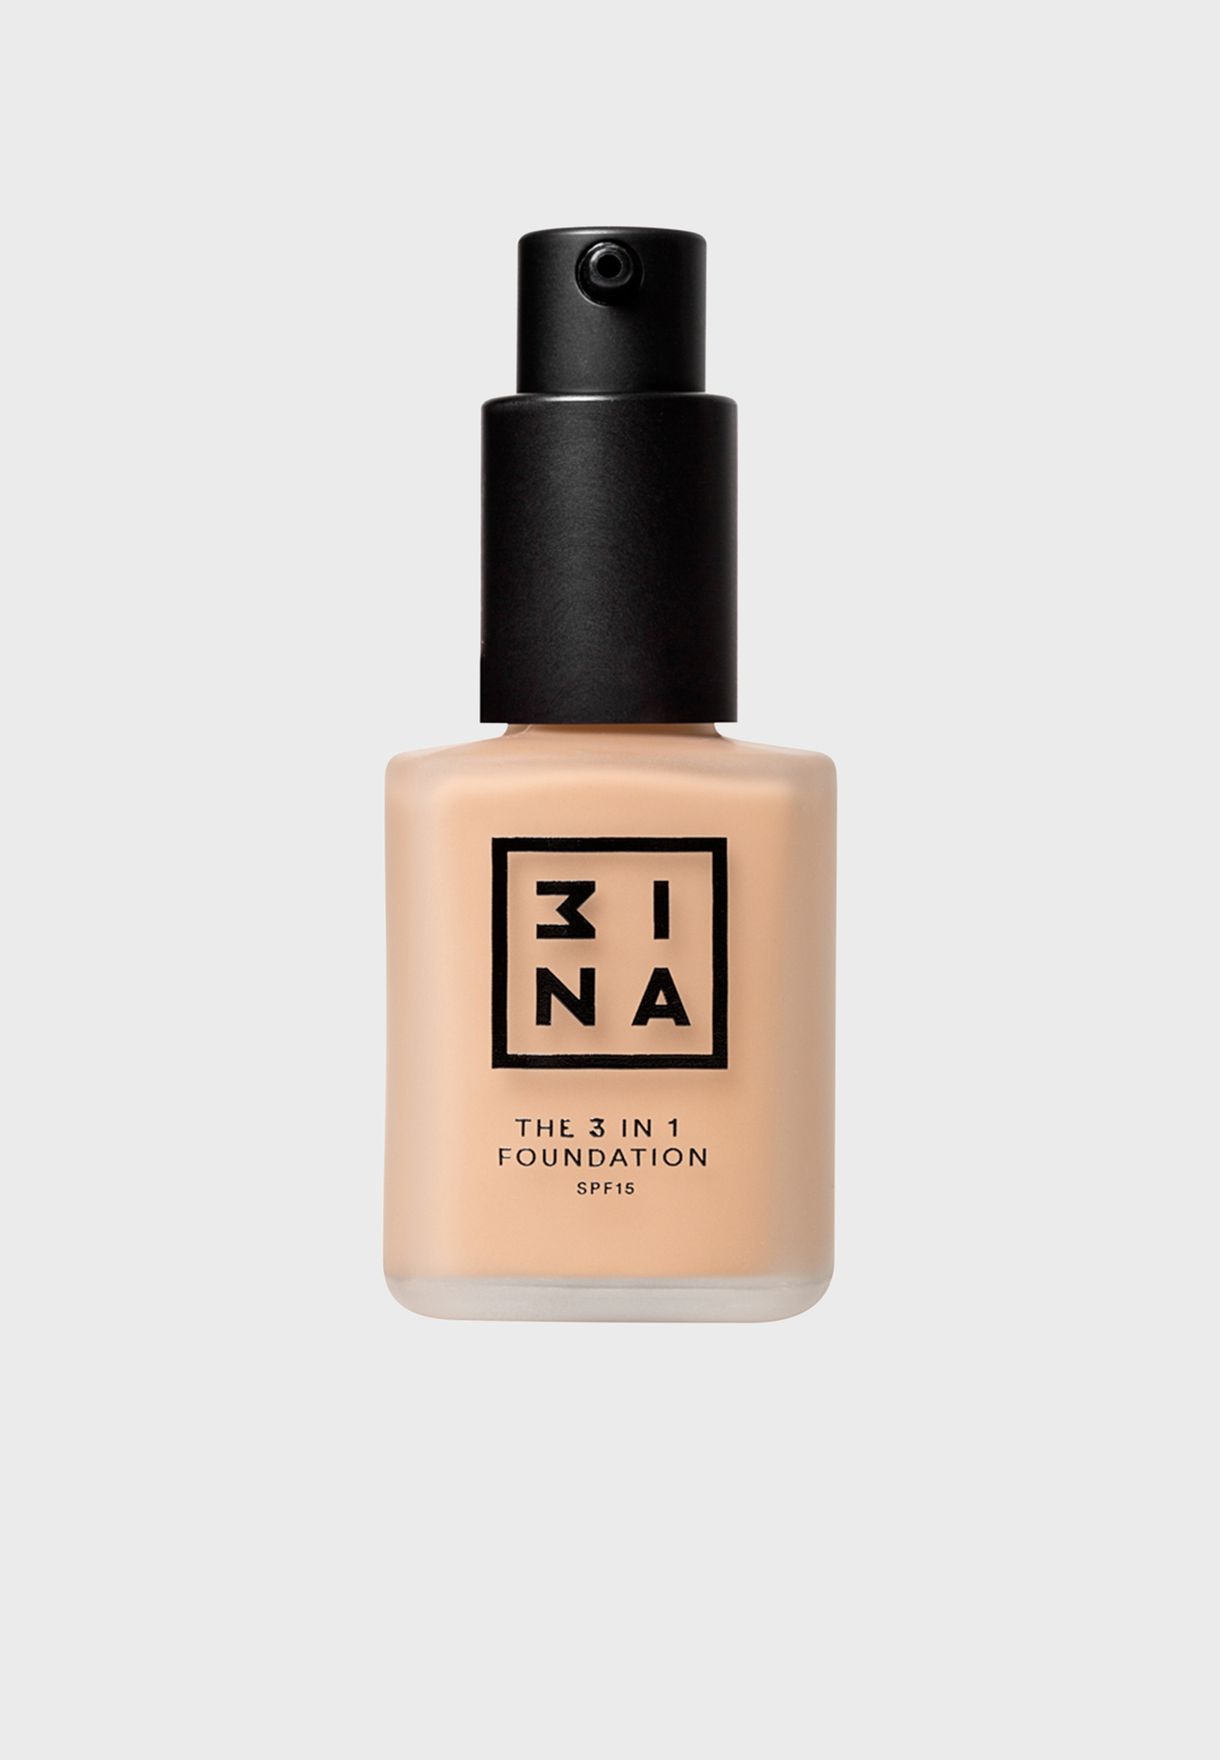 The 3-in-1 Foundation 214